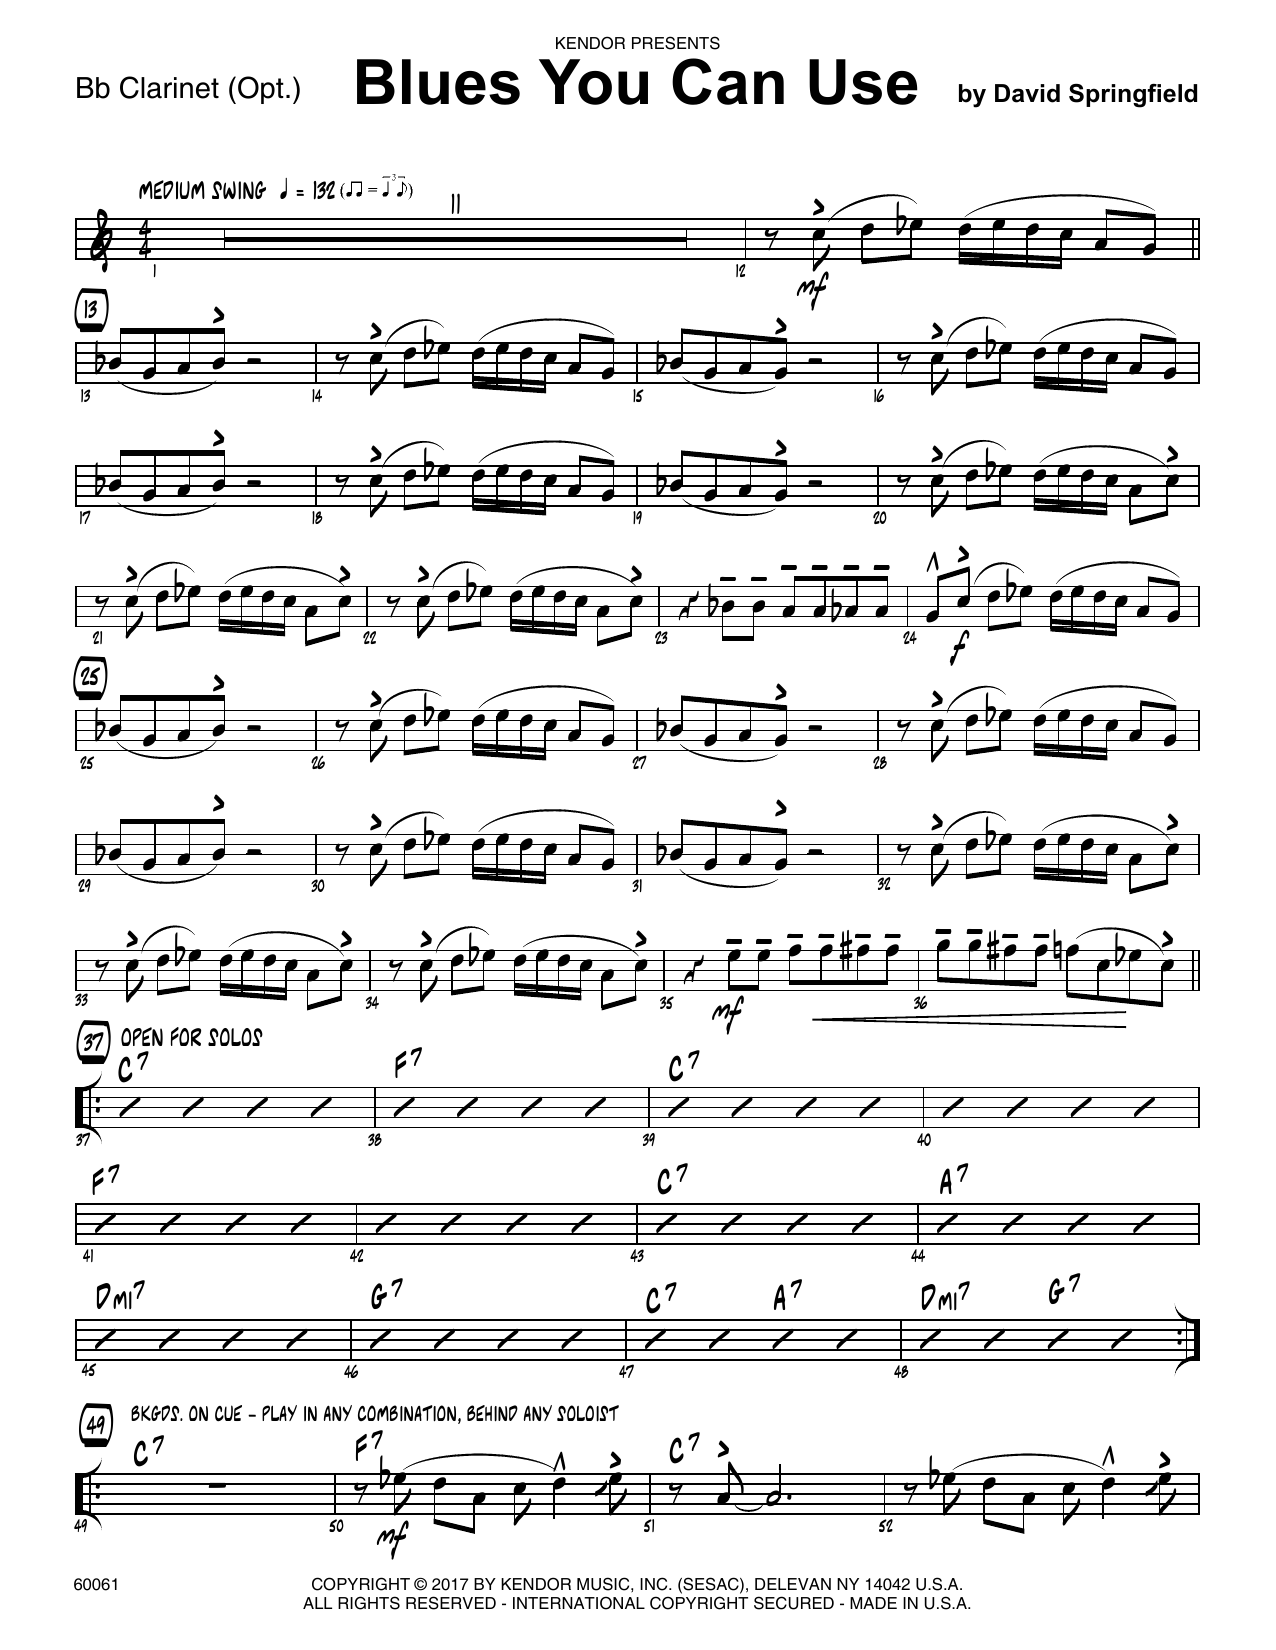 Download David Springfield Blues You Can Use - Bb Clarinet Sheet Music